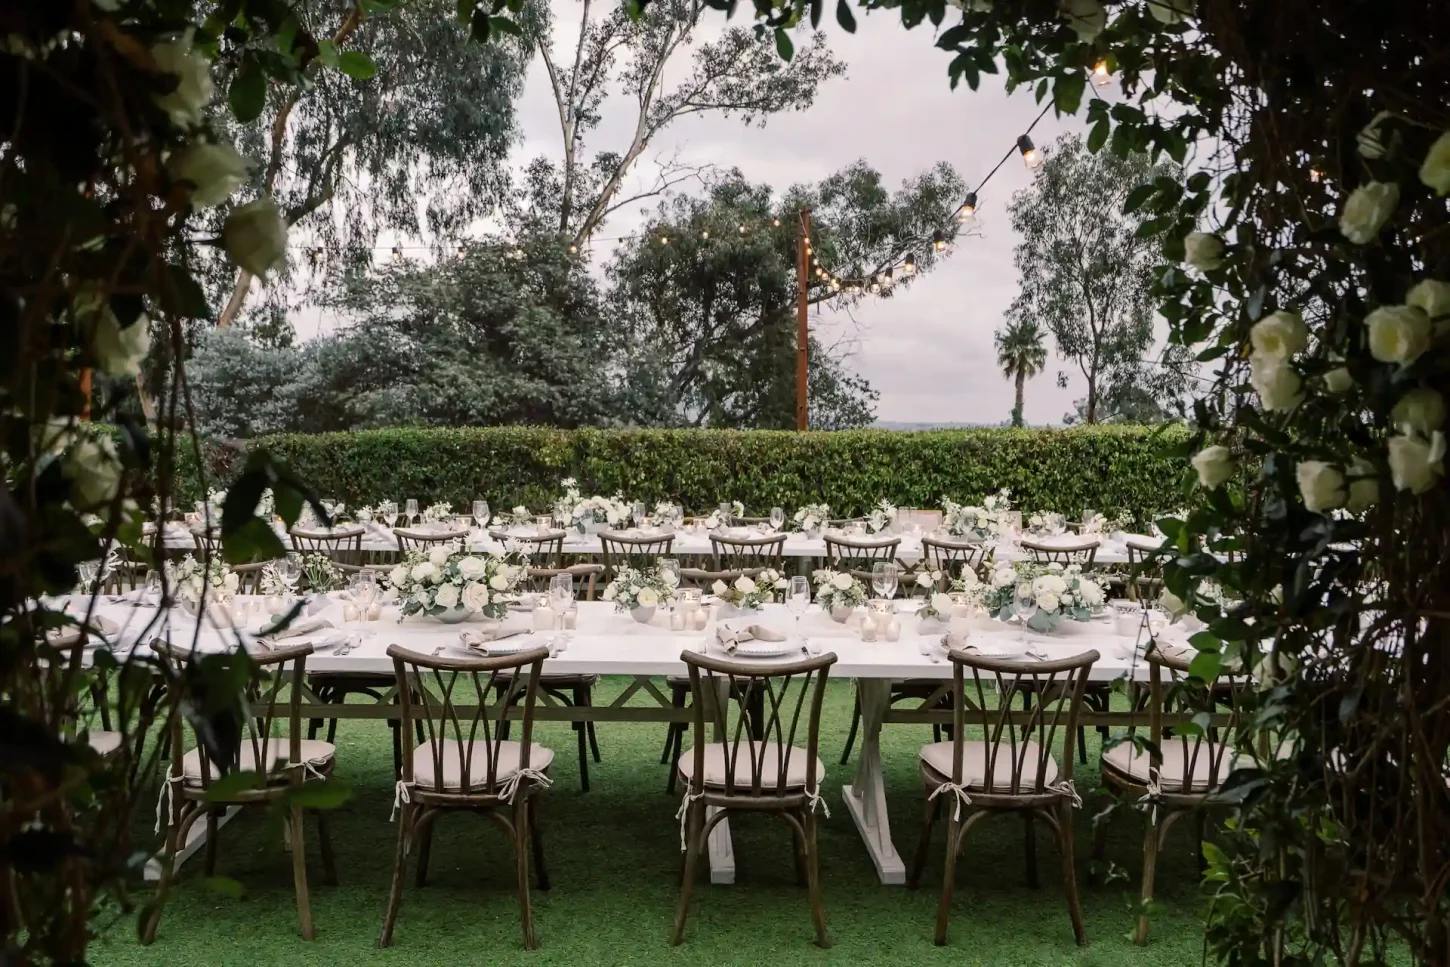 The Inn at Rancho Santa Fe's Decorated Table for a Wedding in the garden